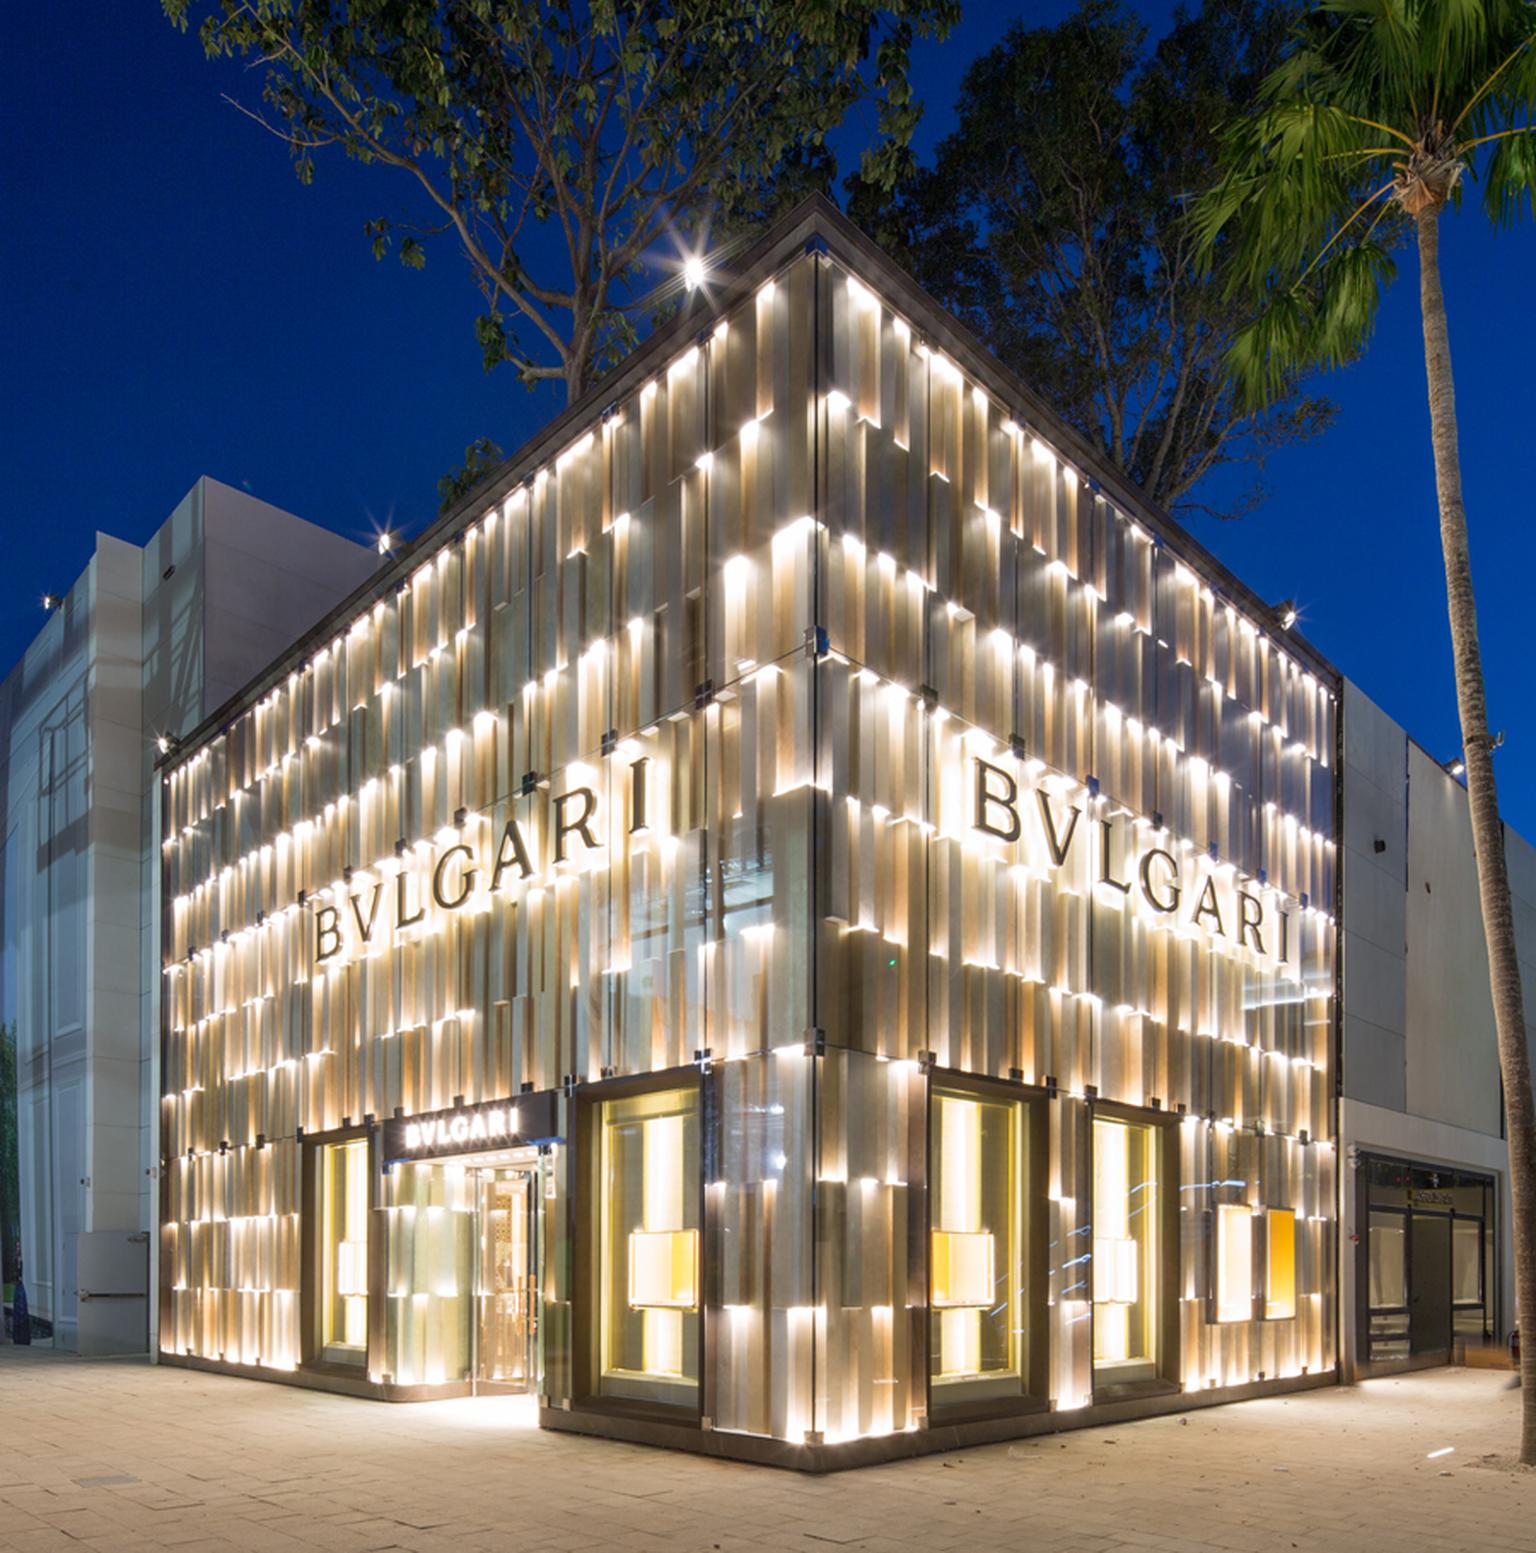 Bulgari jewelry is one of the more recent additions to the Miami Design District, opening its store in 2014.